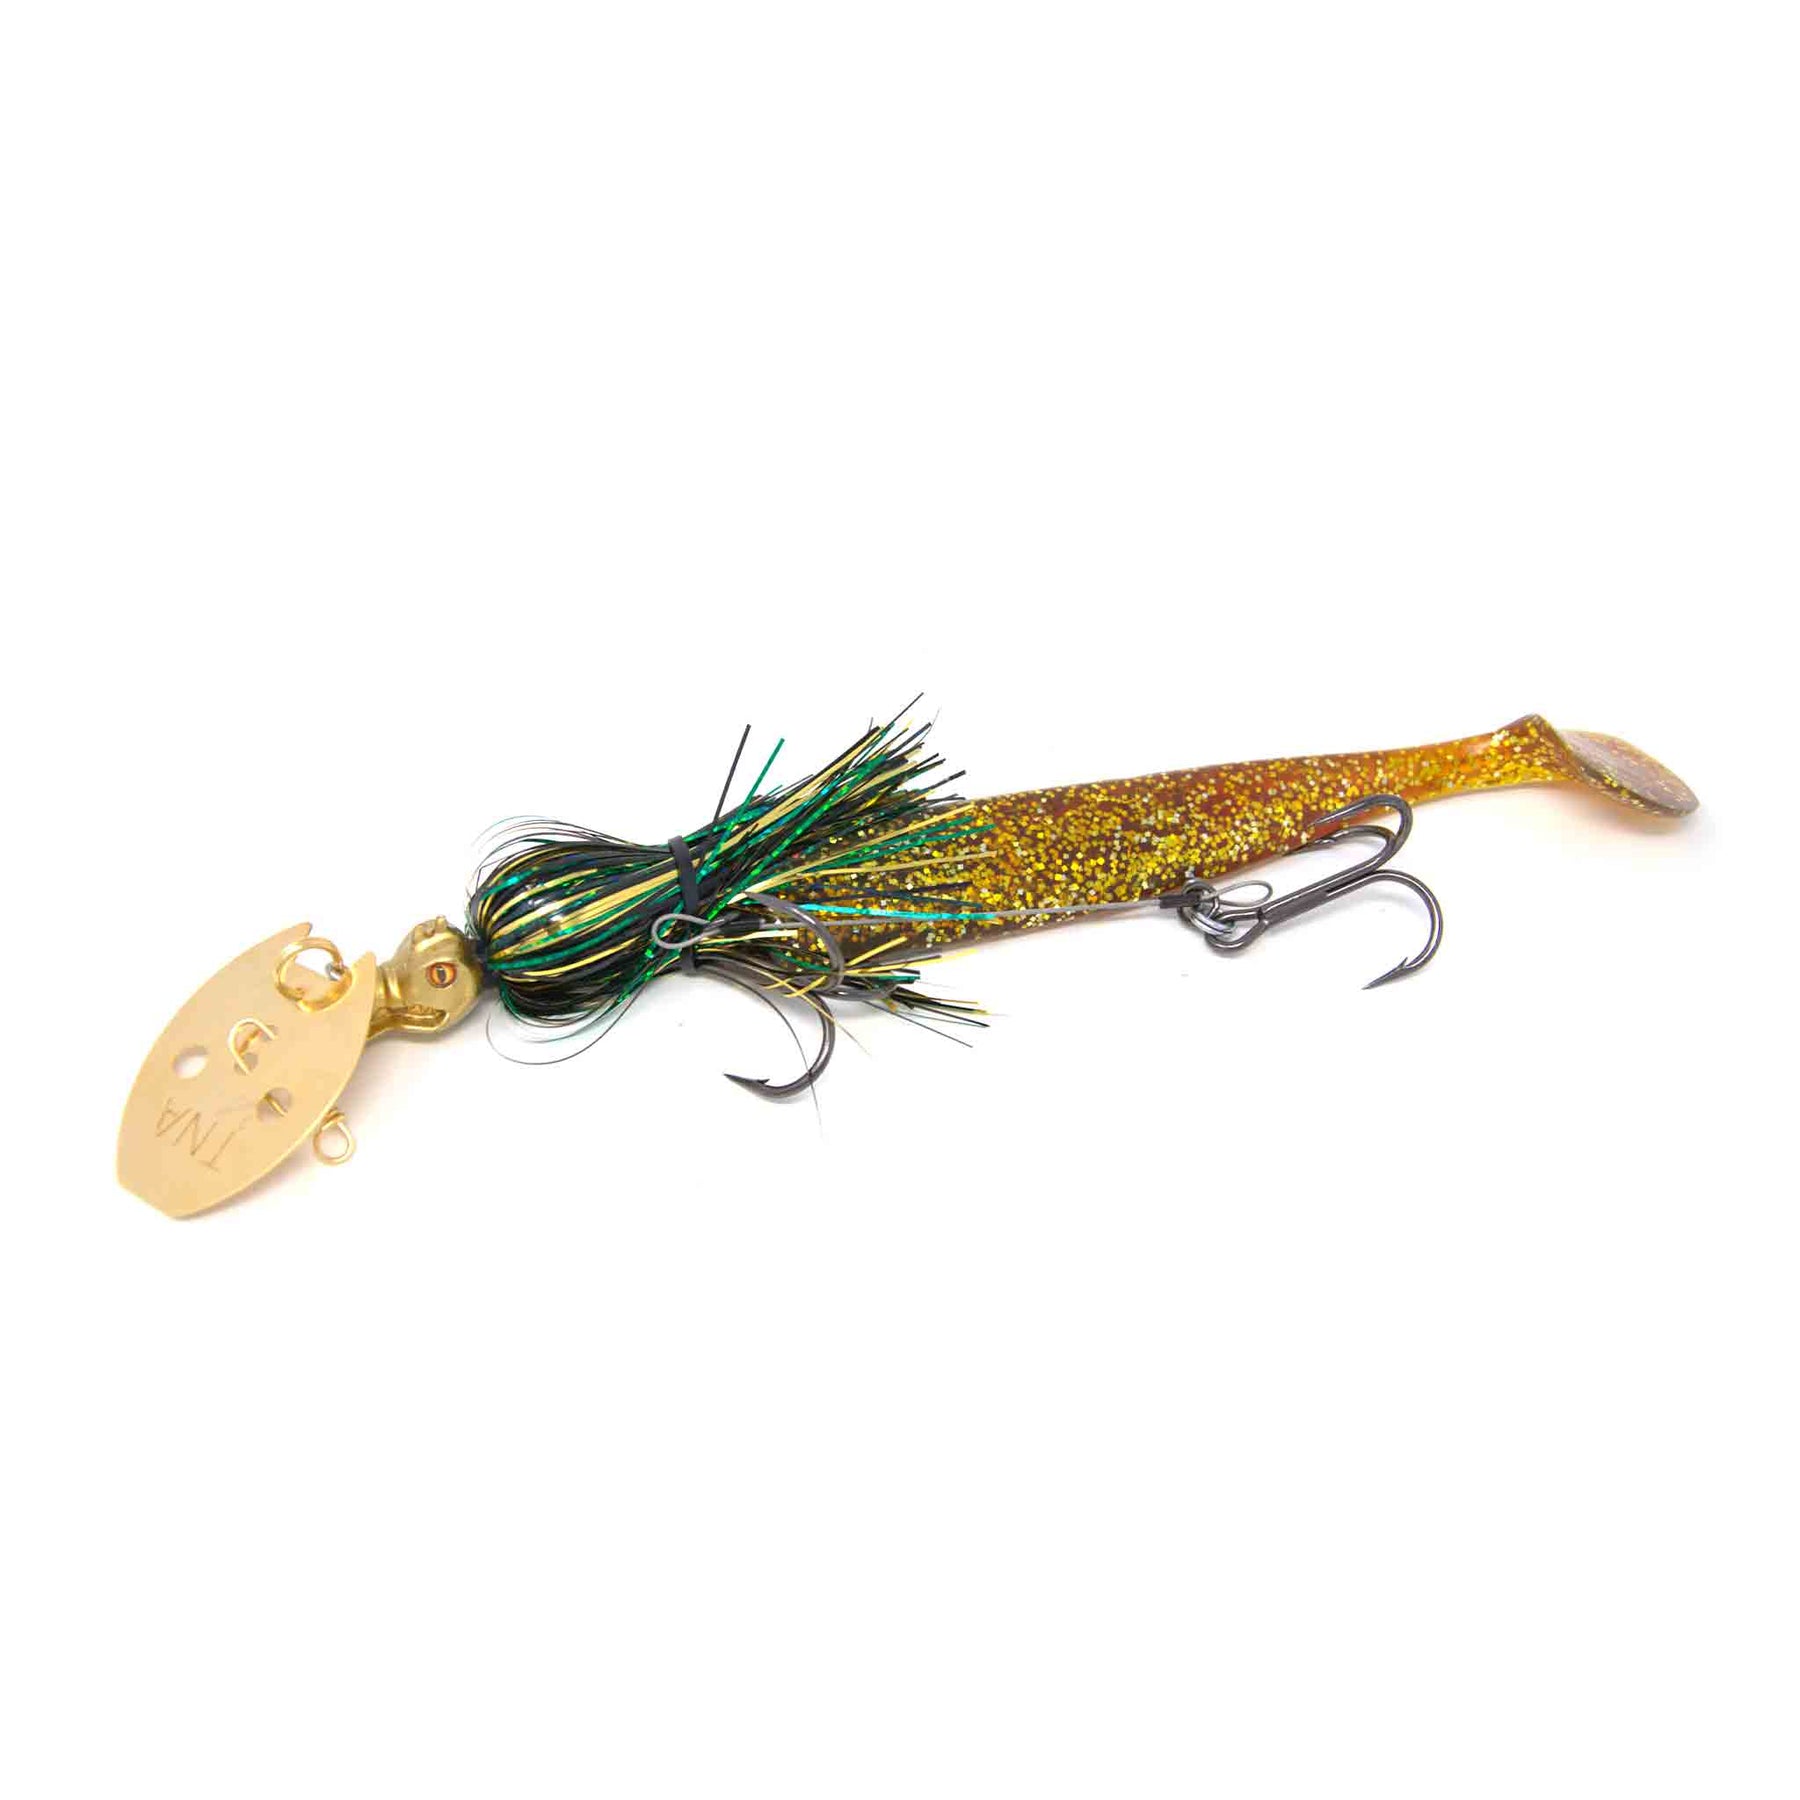 View of Chatterbaits TnA Tackle Waggin Dragon Chatterbait Black Perch available at EZOKO Pike and Musky Shop